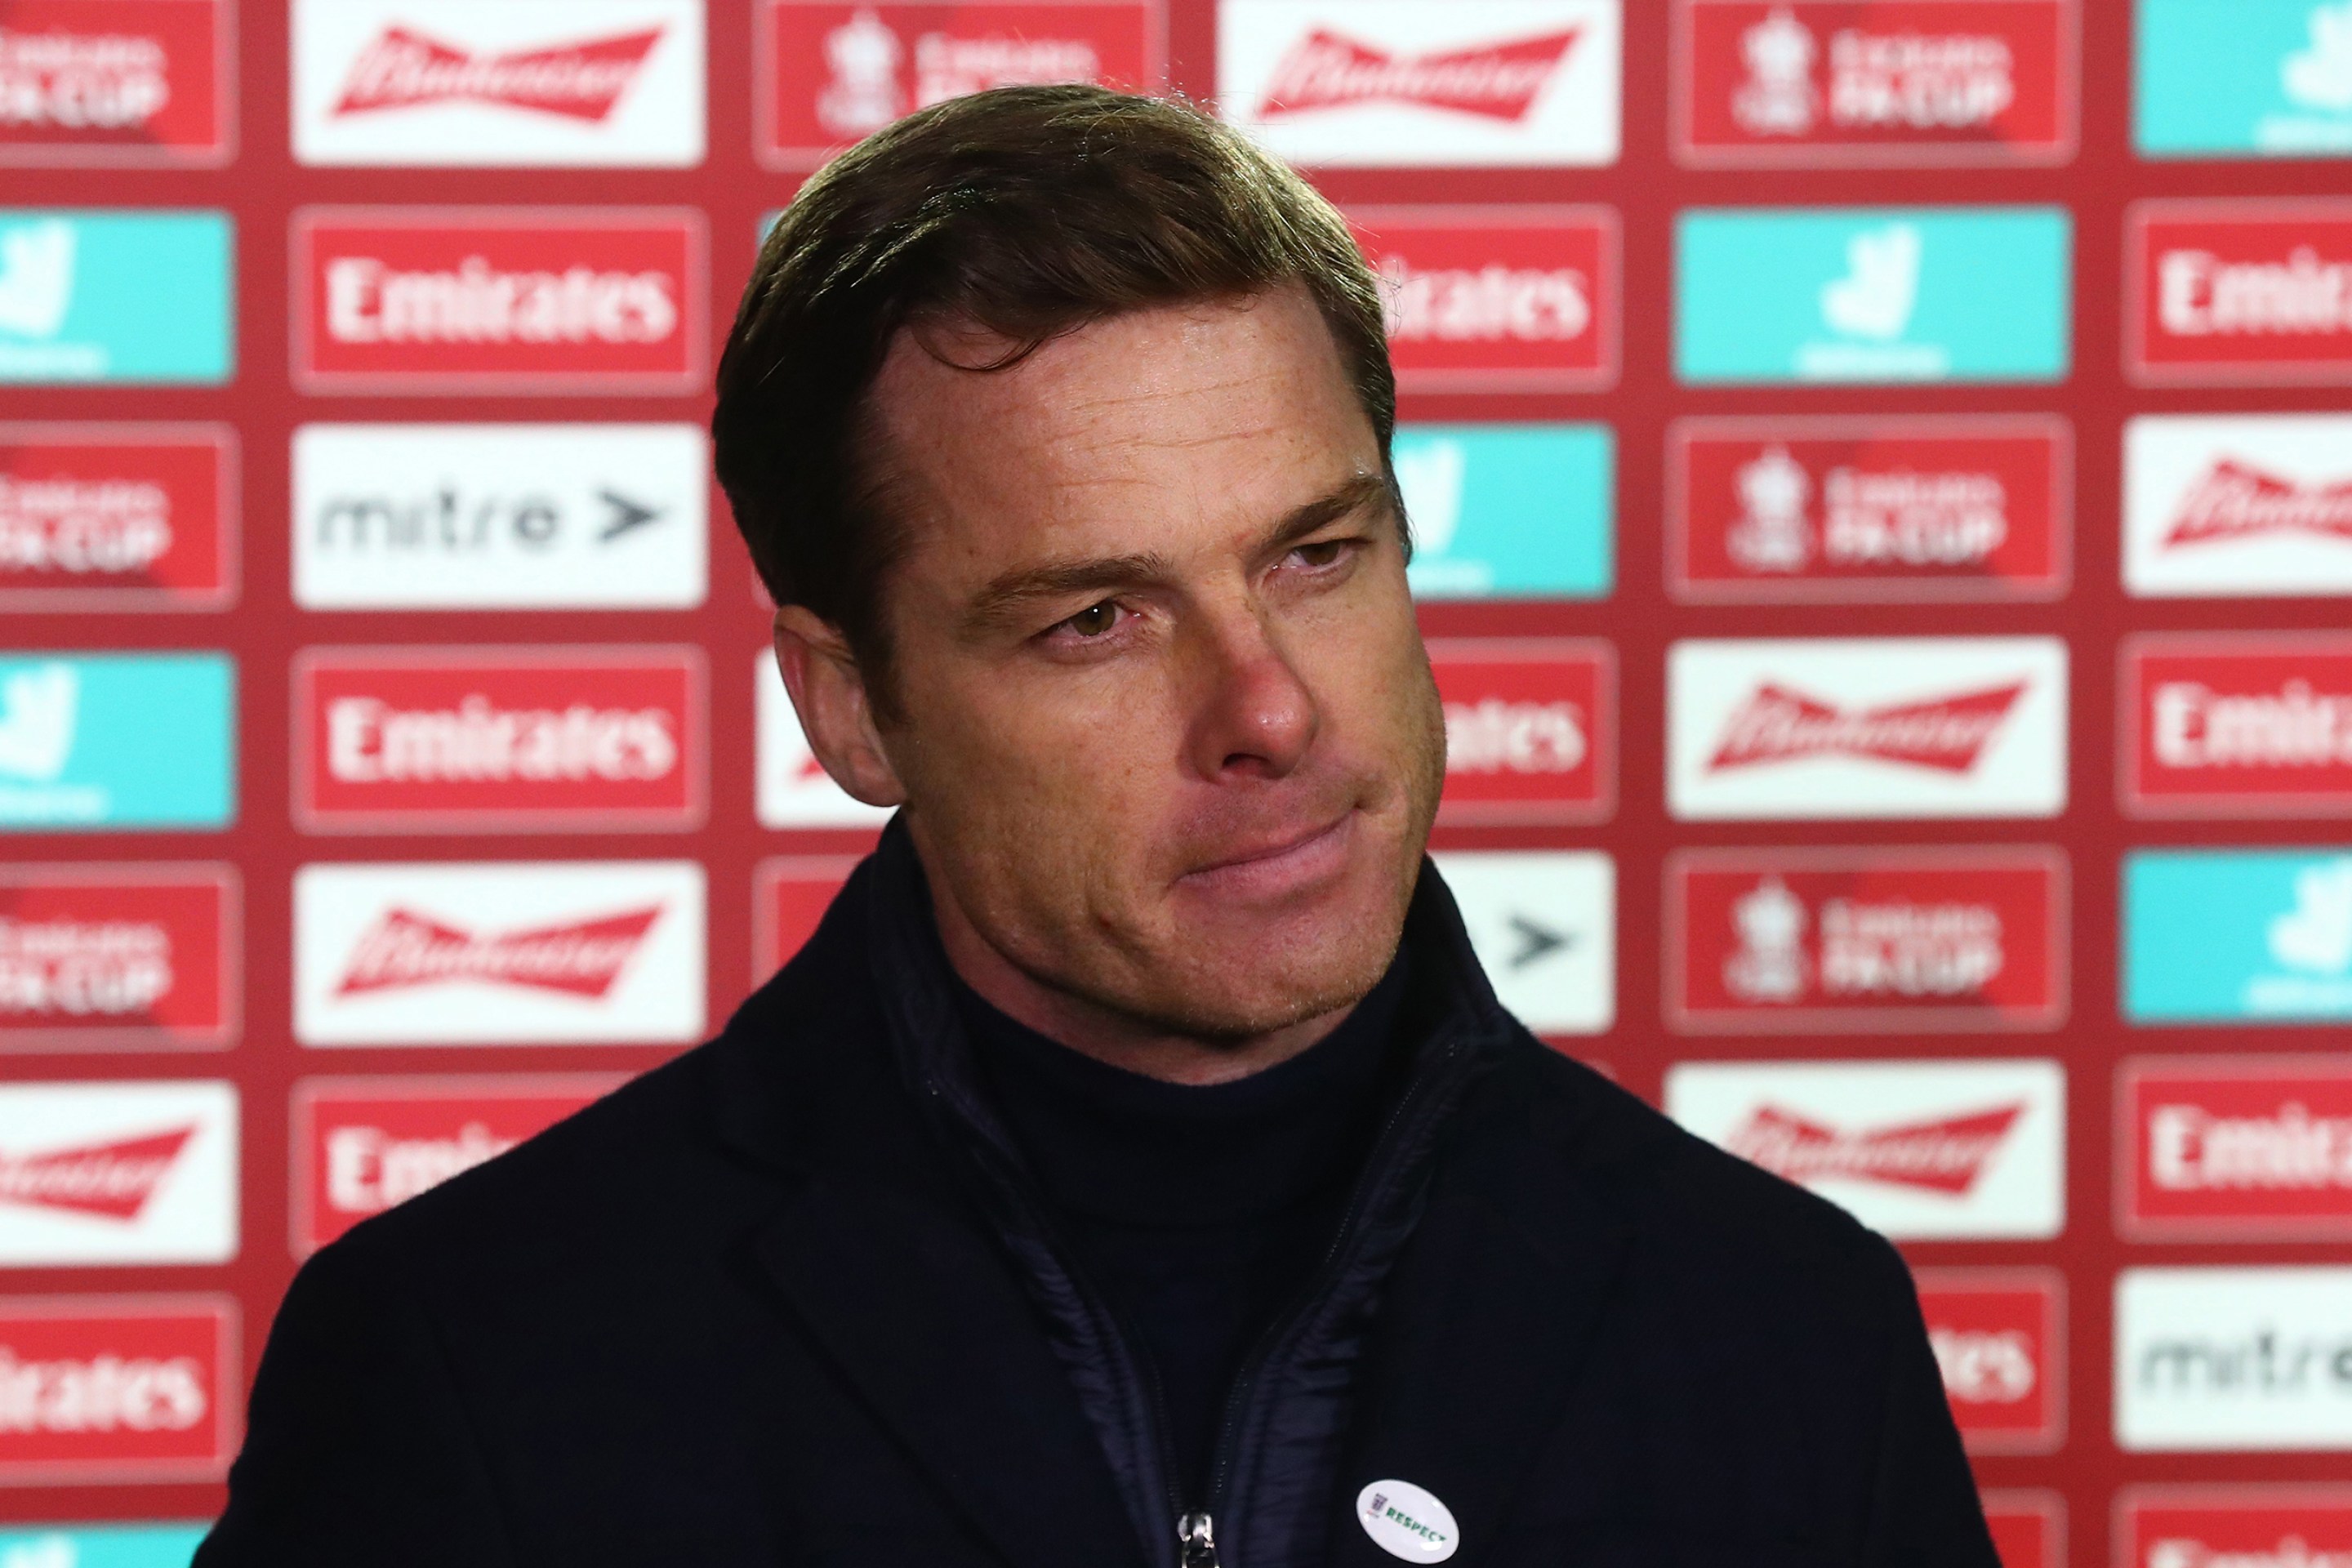 Scott Parker, Manager of Fulham is interviewed after the FA Cup Third Round match between Queens Park Rangers and Fulham at The Kiyan Prince Foundation Stadium on January 09, 2021 in London, England.